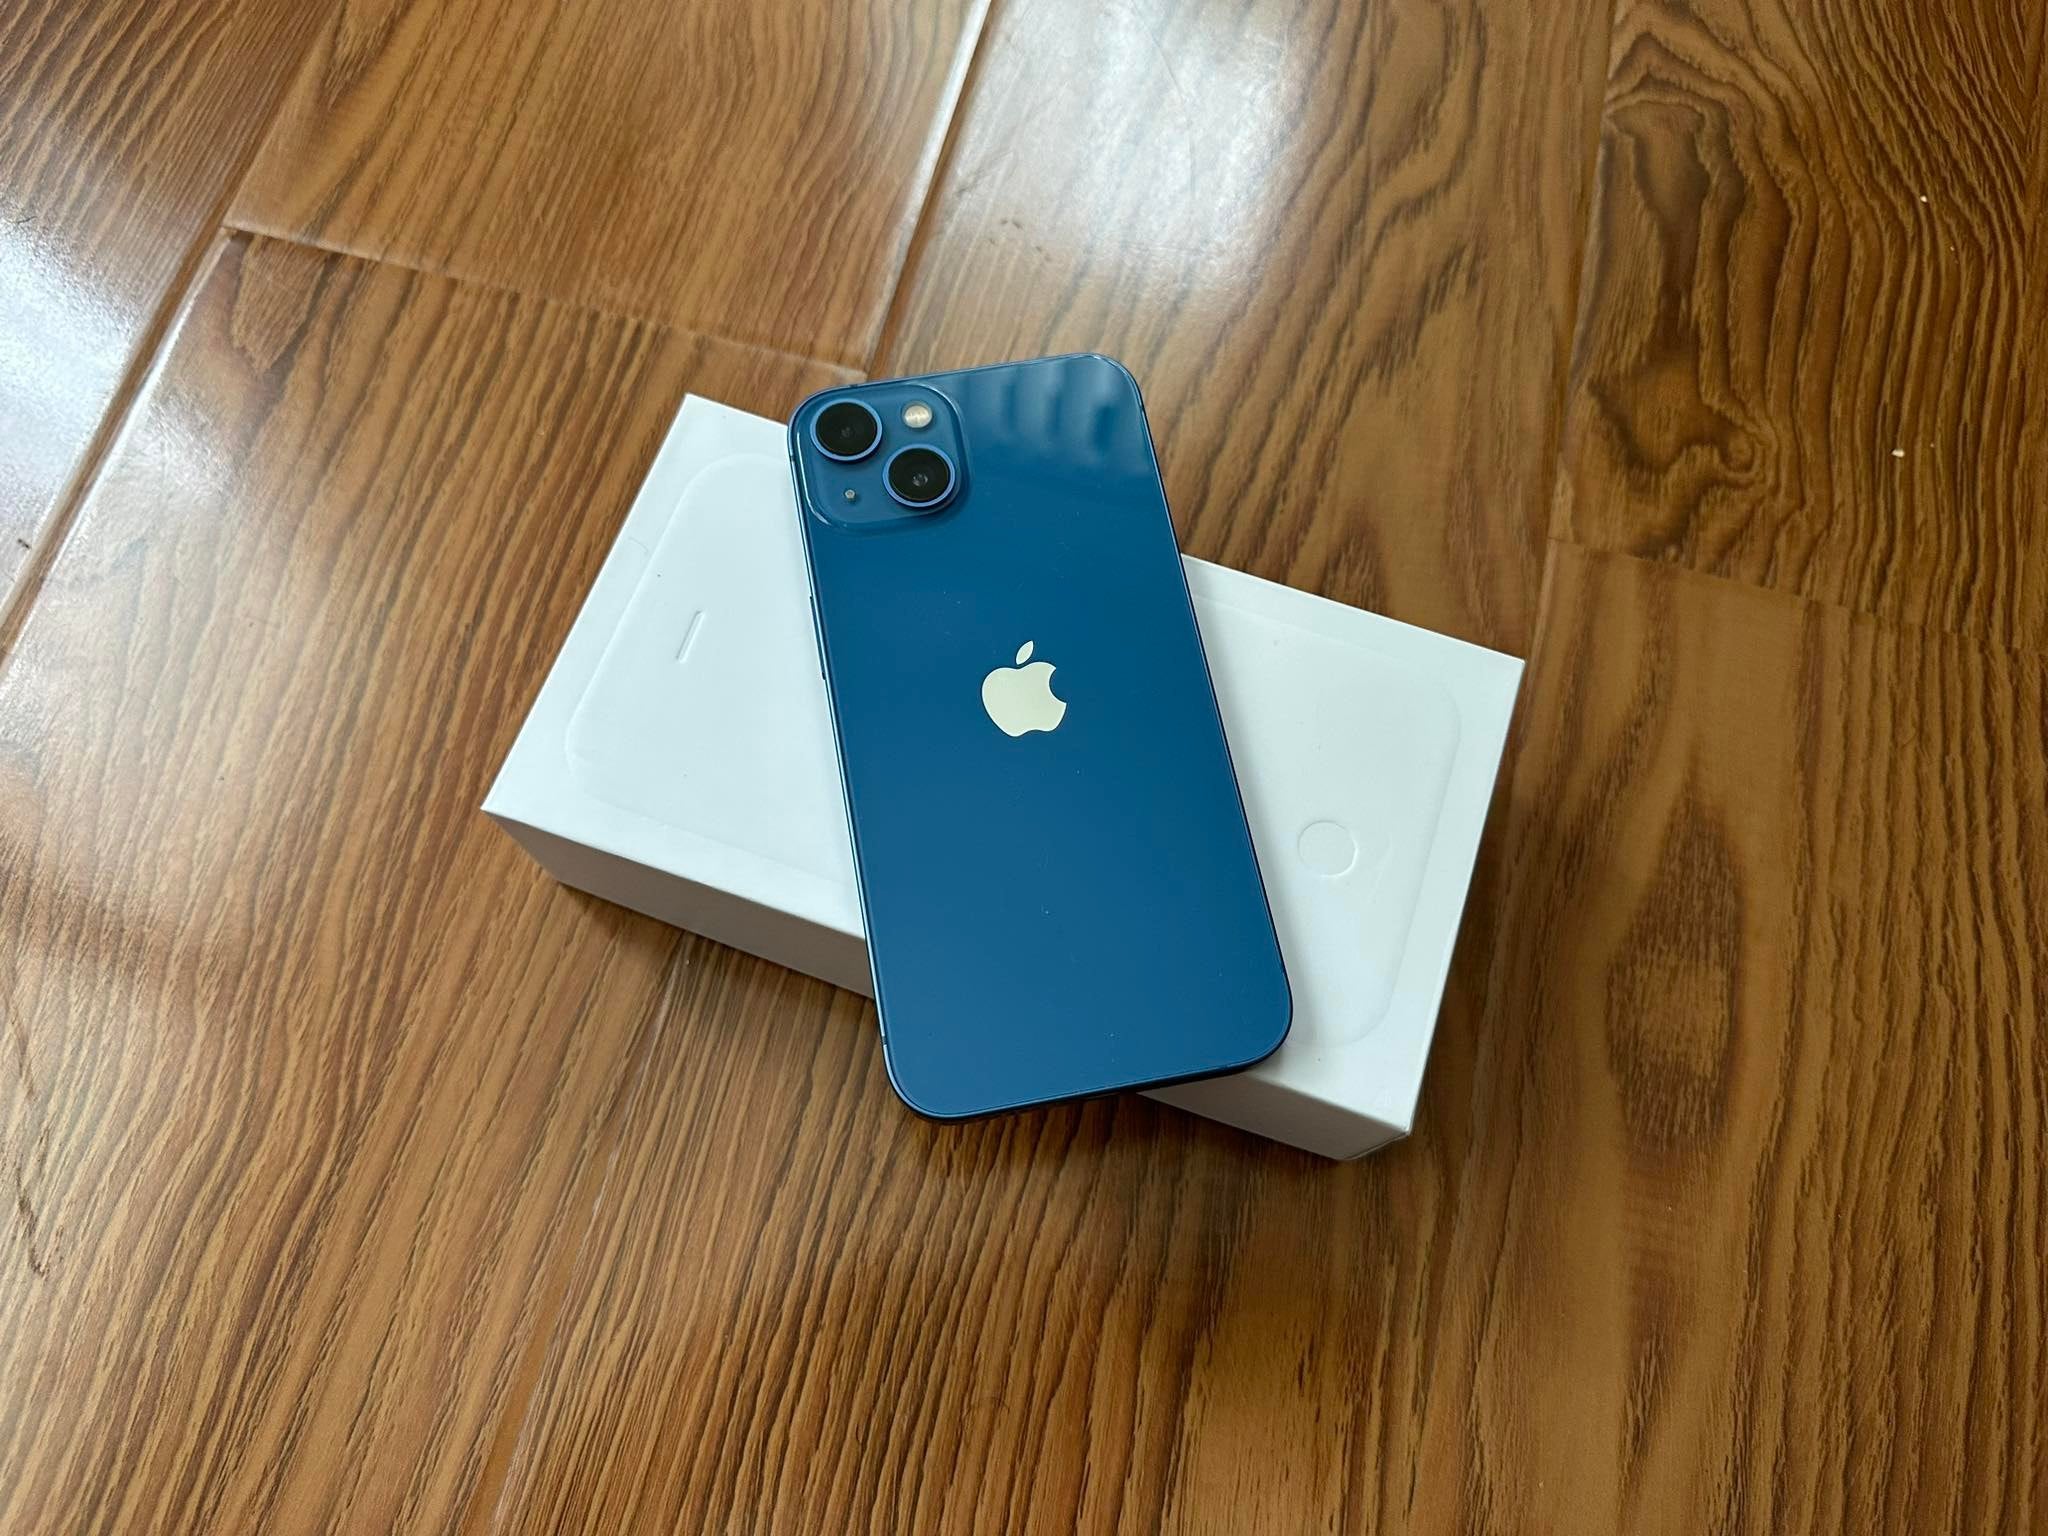 Apple iPhone 13 128GB 5G Blue (Dsp & Batt msg) New Battery, Case, Screen Protector & Shipping (Exc)